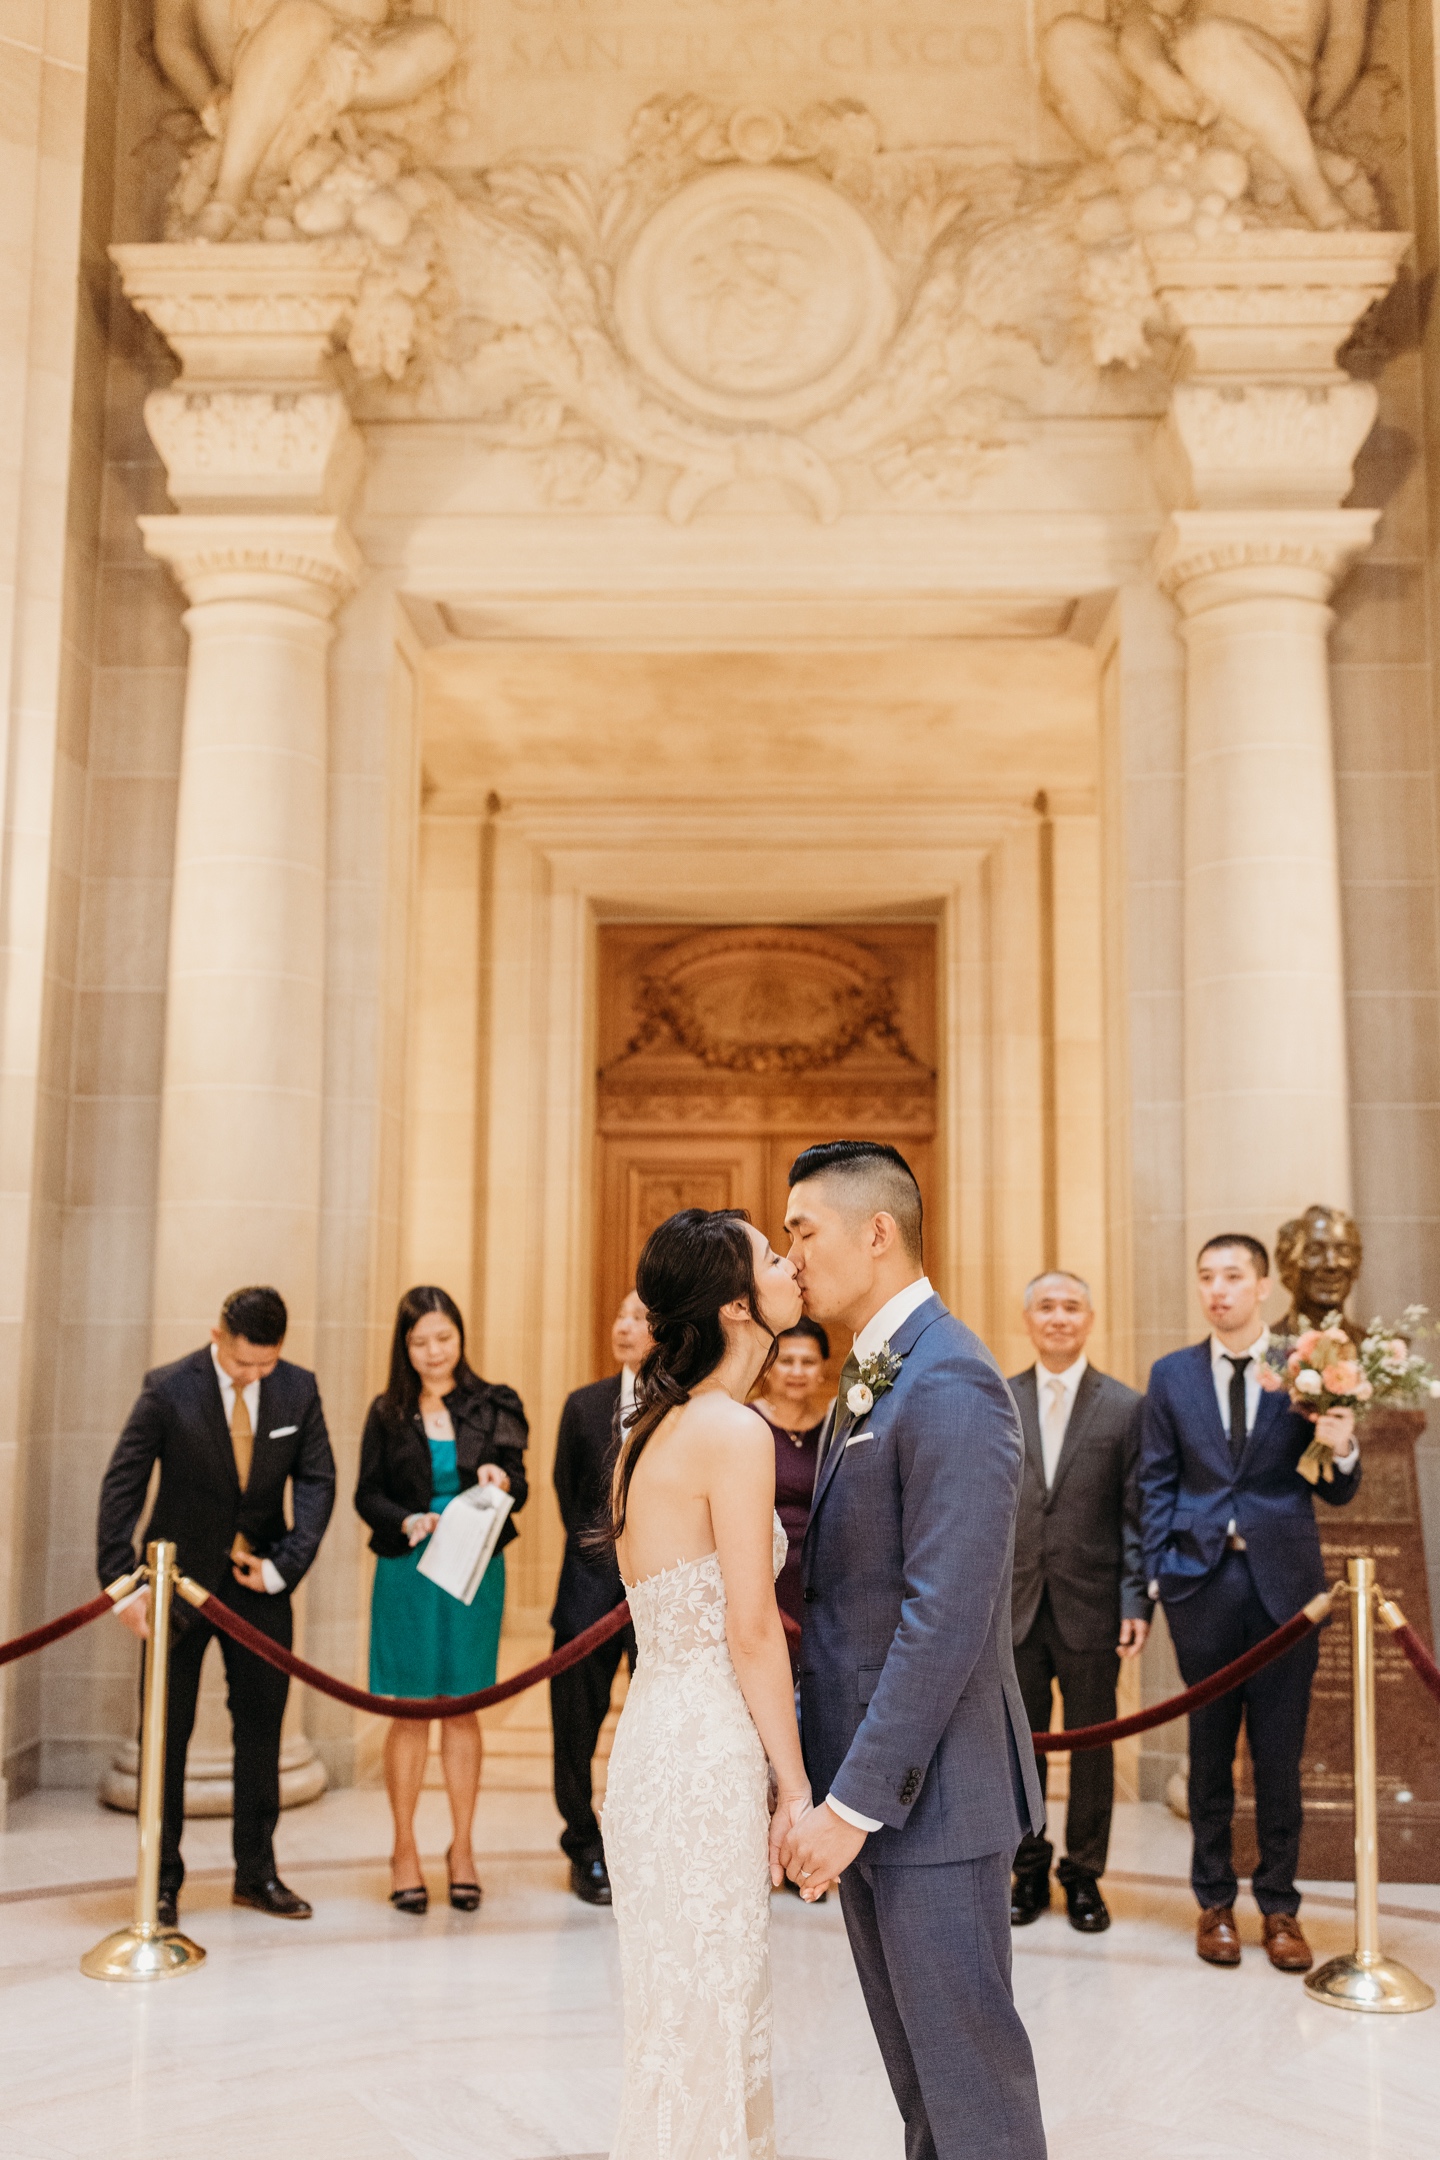 Bride and groom kiss after exchanging vows during their San Francisco City Hall elopement ceremony while their family watches.